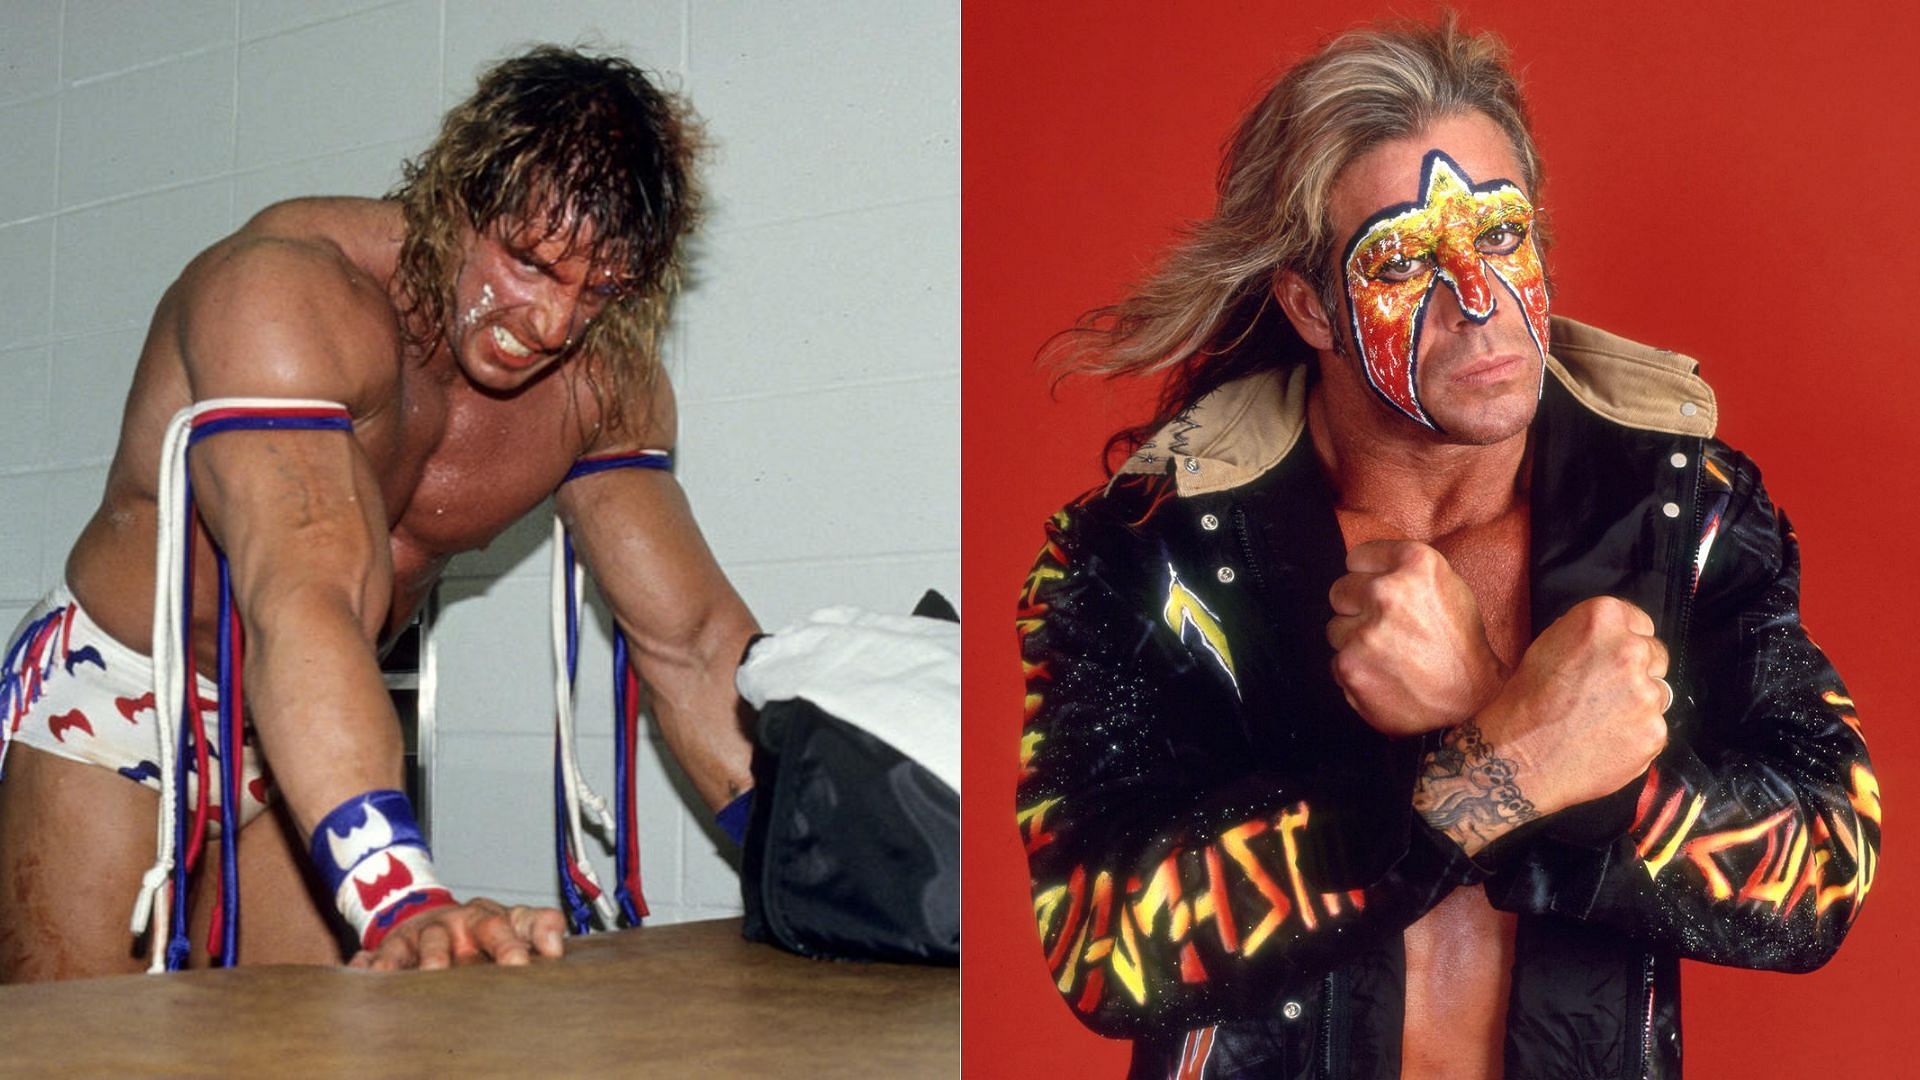 2014 WWE Hall of Fame inductee The Ultimate Warrior